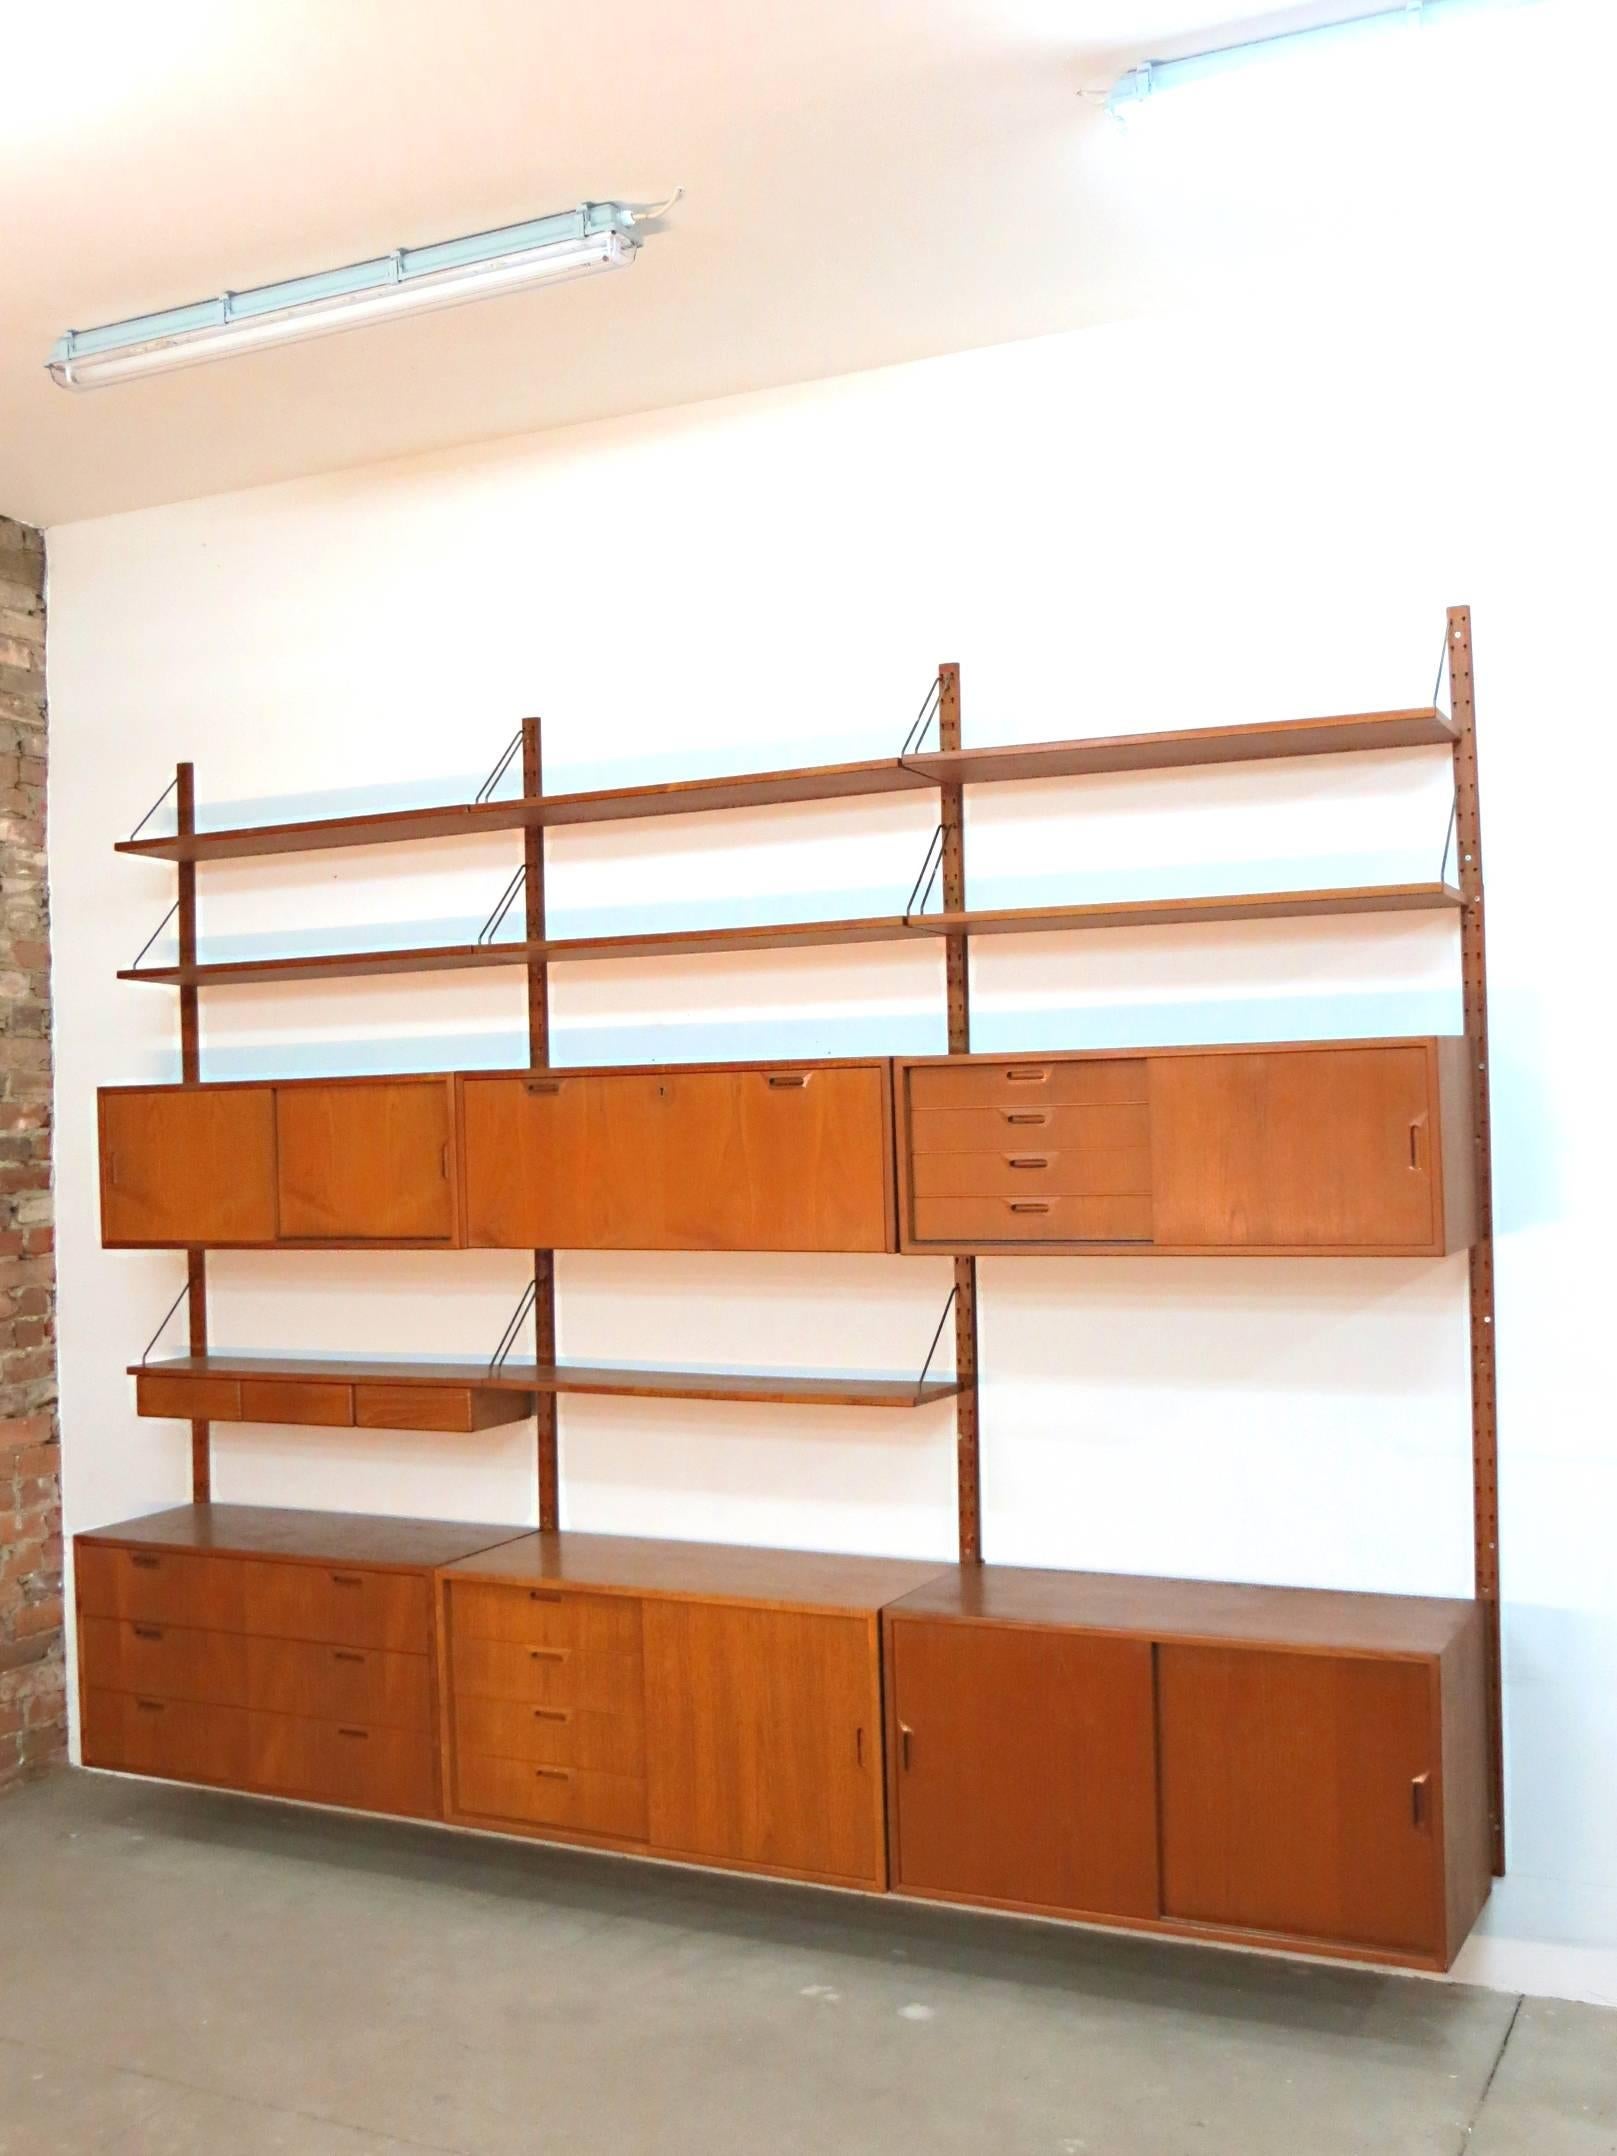 This Danish midcentury vintage jewel was designed in the early 1960s by the often praised Danish designer Sven Ellekaer for Albert Hansen in Denmark.
The particularities of this modular wall unit are the multiple storage capacity which can placed